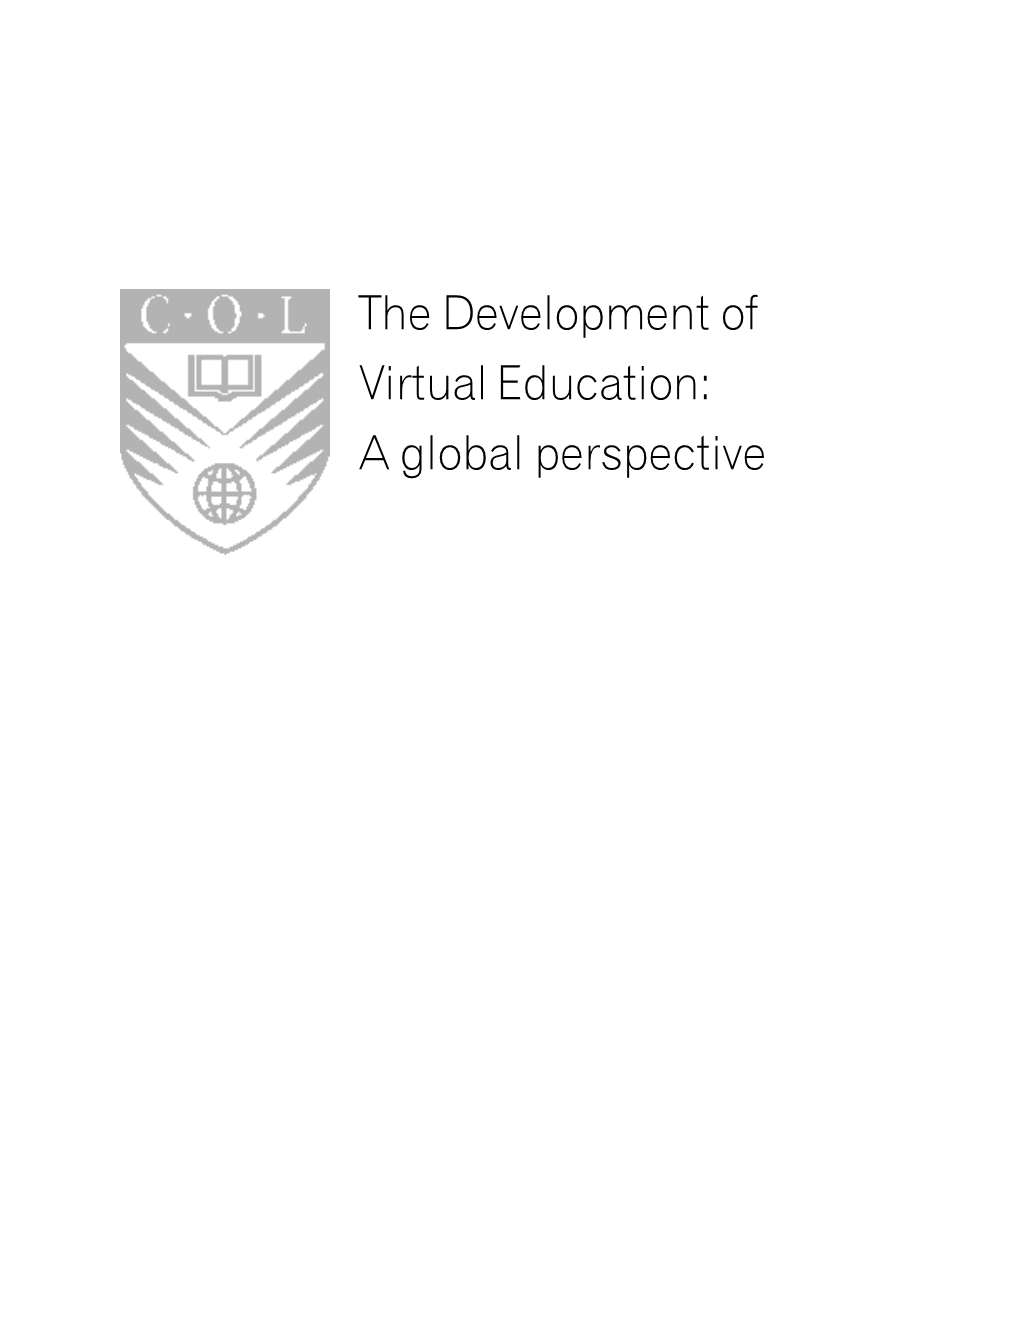 The Development of Virtual Education: a Global Perspective Ii the Development of Virtual Education: a Global Perspective